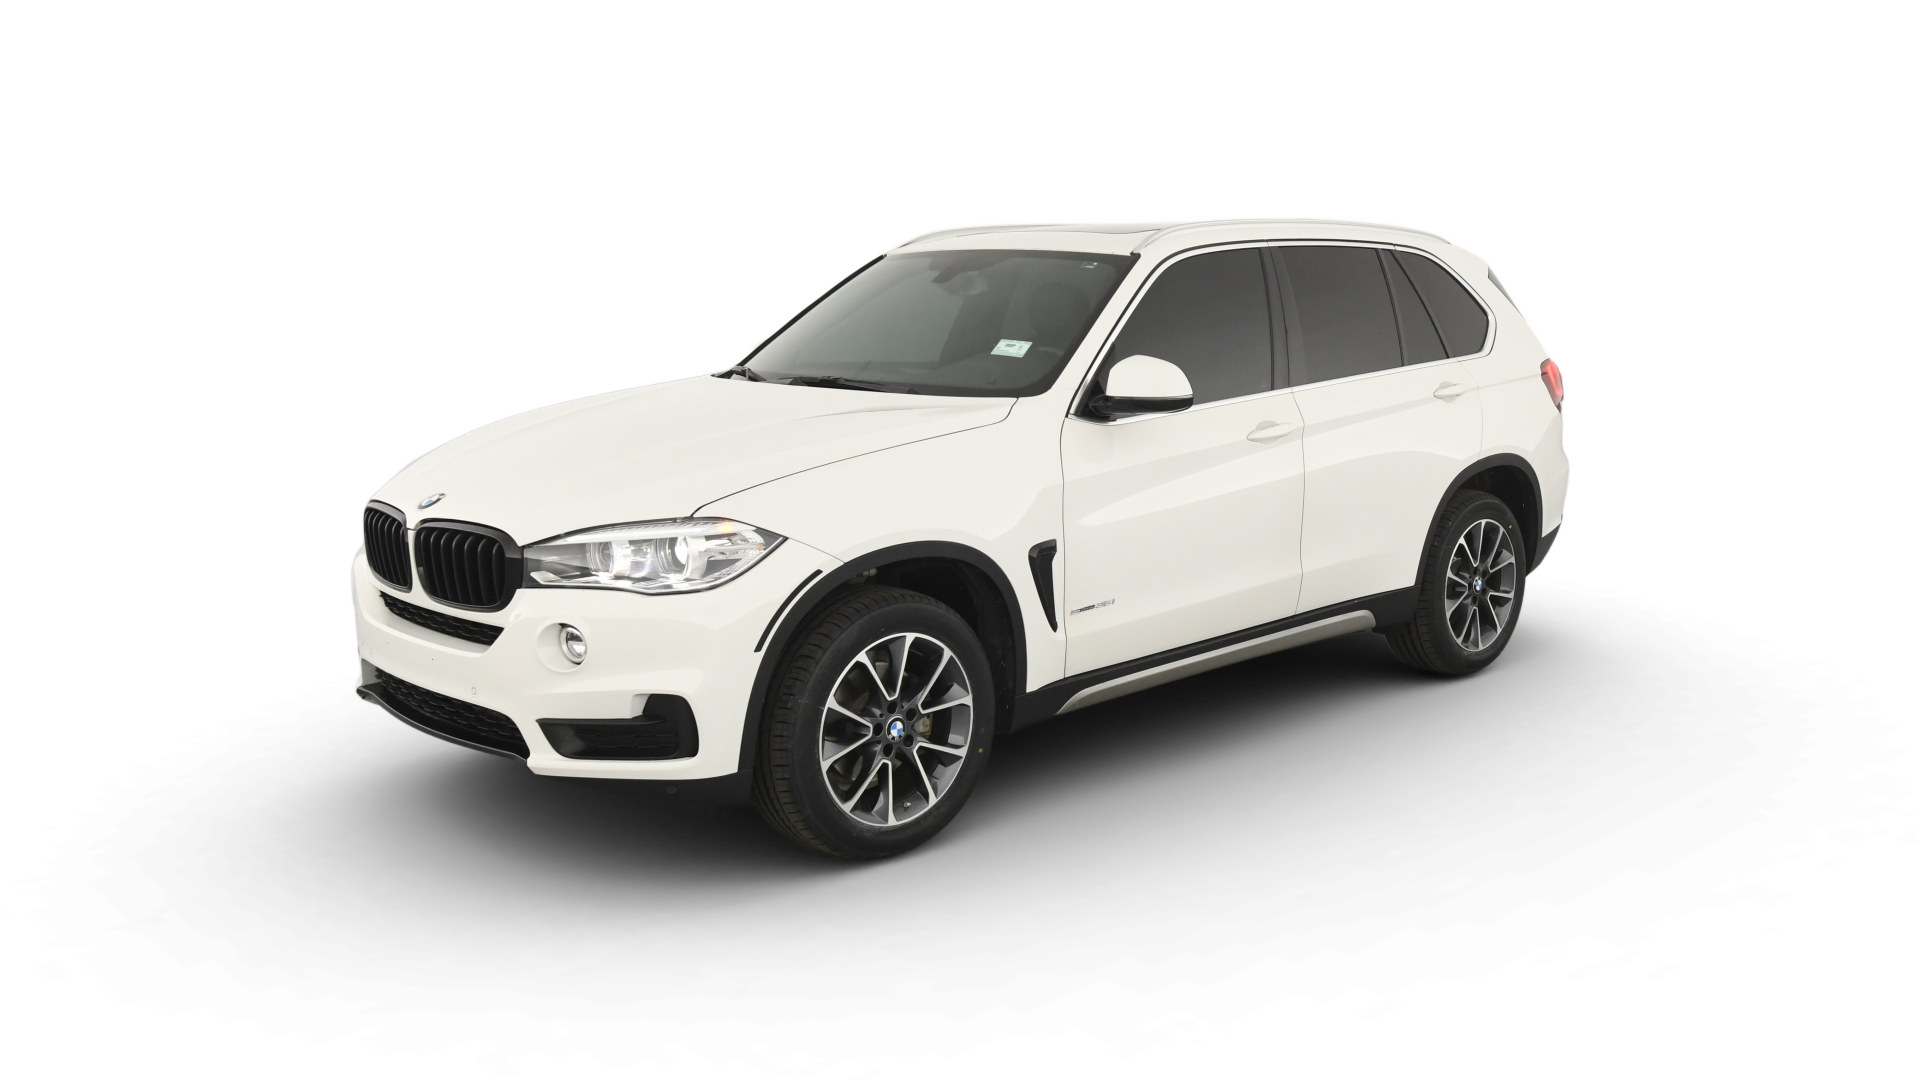 Used BMW X5 for Sale Online